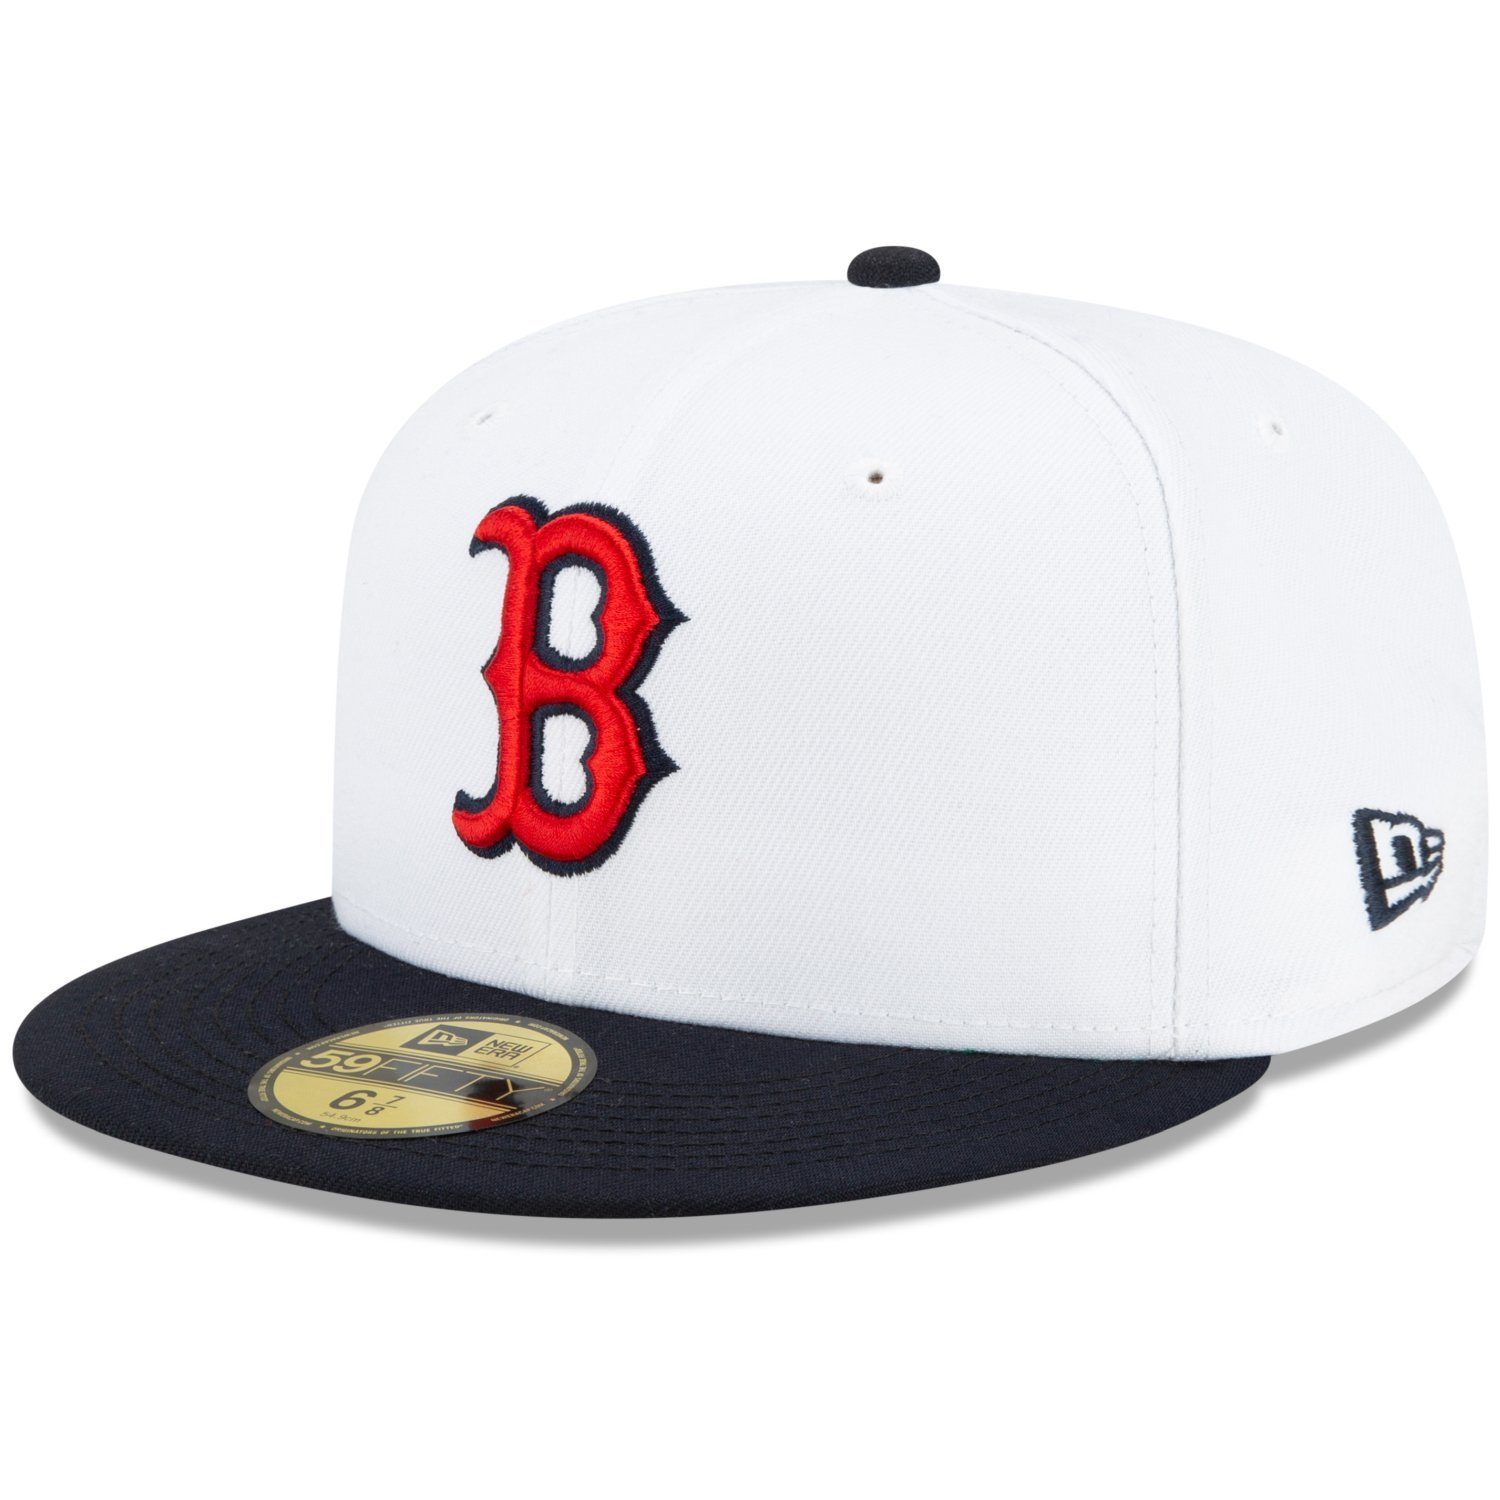 Cap New Fitted Sox SERIES 2004 Red 59Fifty Boston Era WORLD